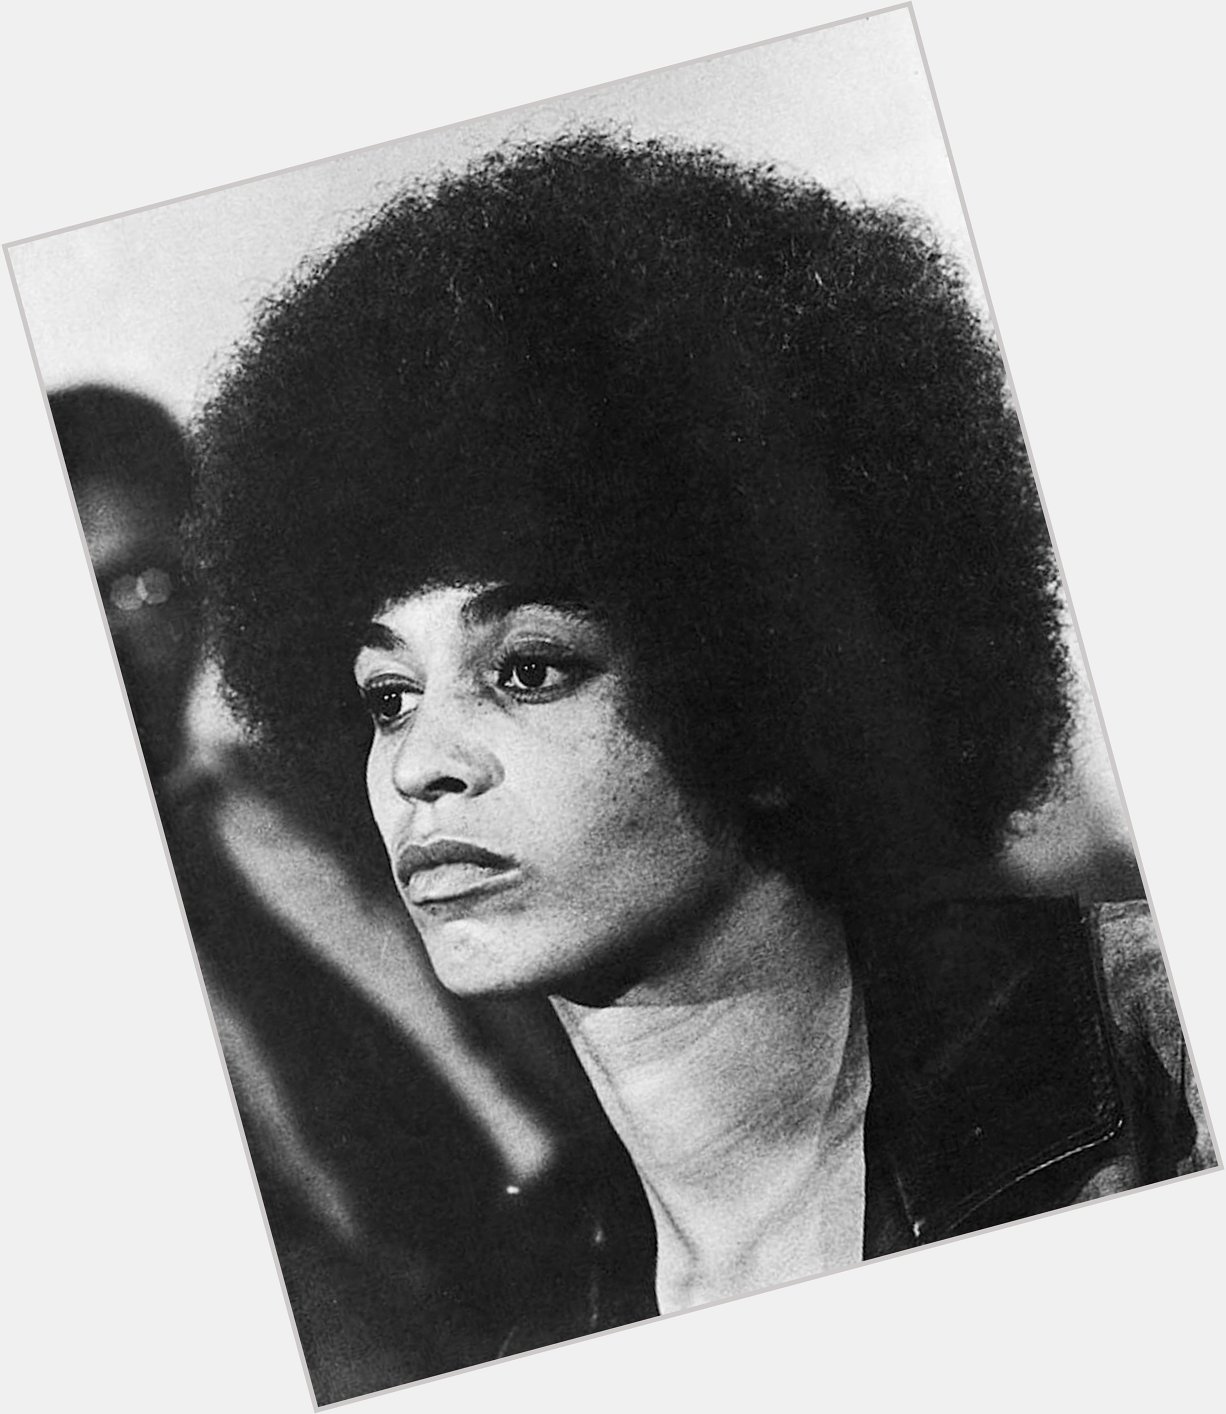    Happy Birthday to Ms. Angela Davis! A woman dedicated to educating & elevating the masses. 